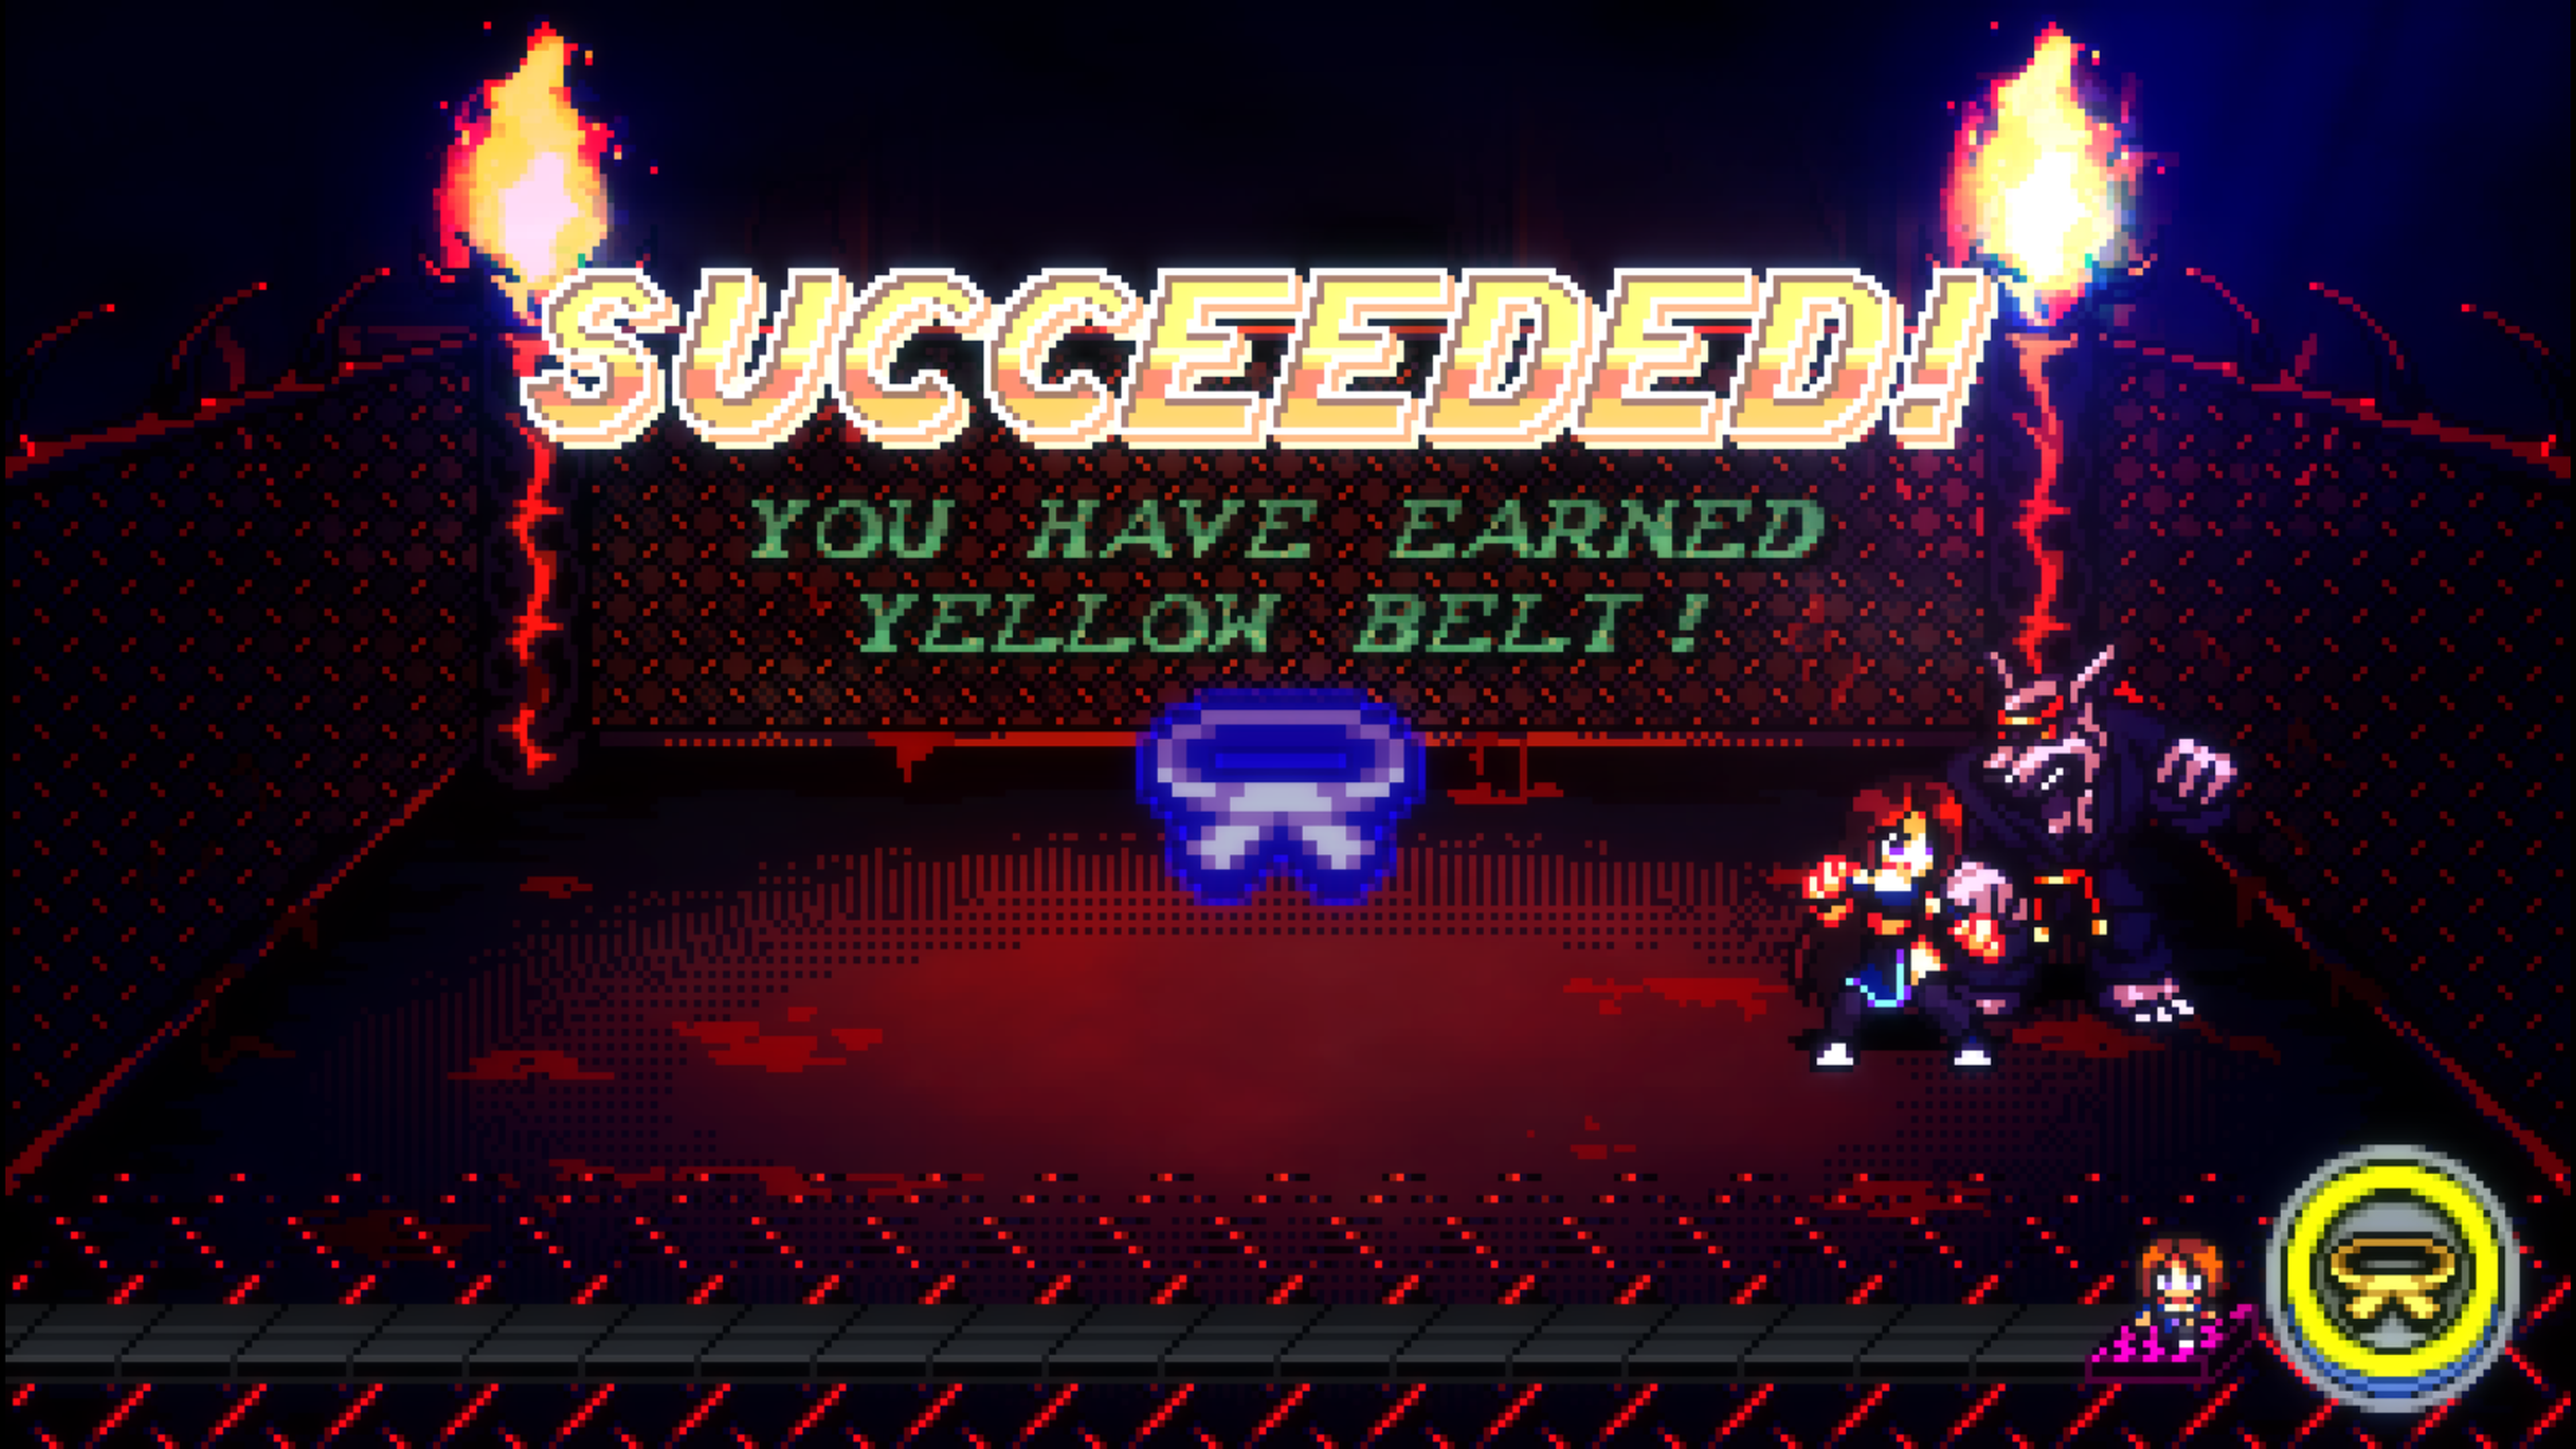 A 2D pixel art character named Gal stands fists clenched, face to face with a tall mutated rat who is wearing a black karate suit and a red belt. The characters are standing inside a steel cage fighting arena that has flaming posts in its corners. Large bold yellow text in the middle of the image reads "SUCCEEDED!". Below this in smaller bold green text reads "YOU HAVE EARNED YELLOW BELT!" with a belt icon below. The bottom right displays a yellow belt icon surrounded by a yellow circle.